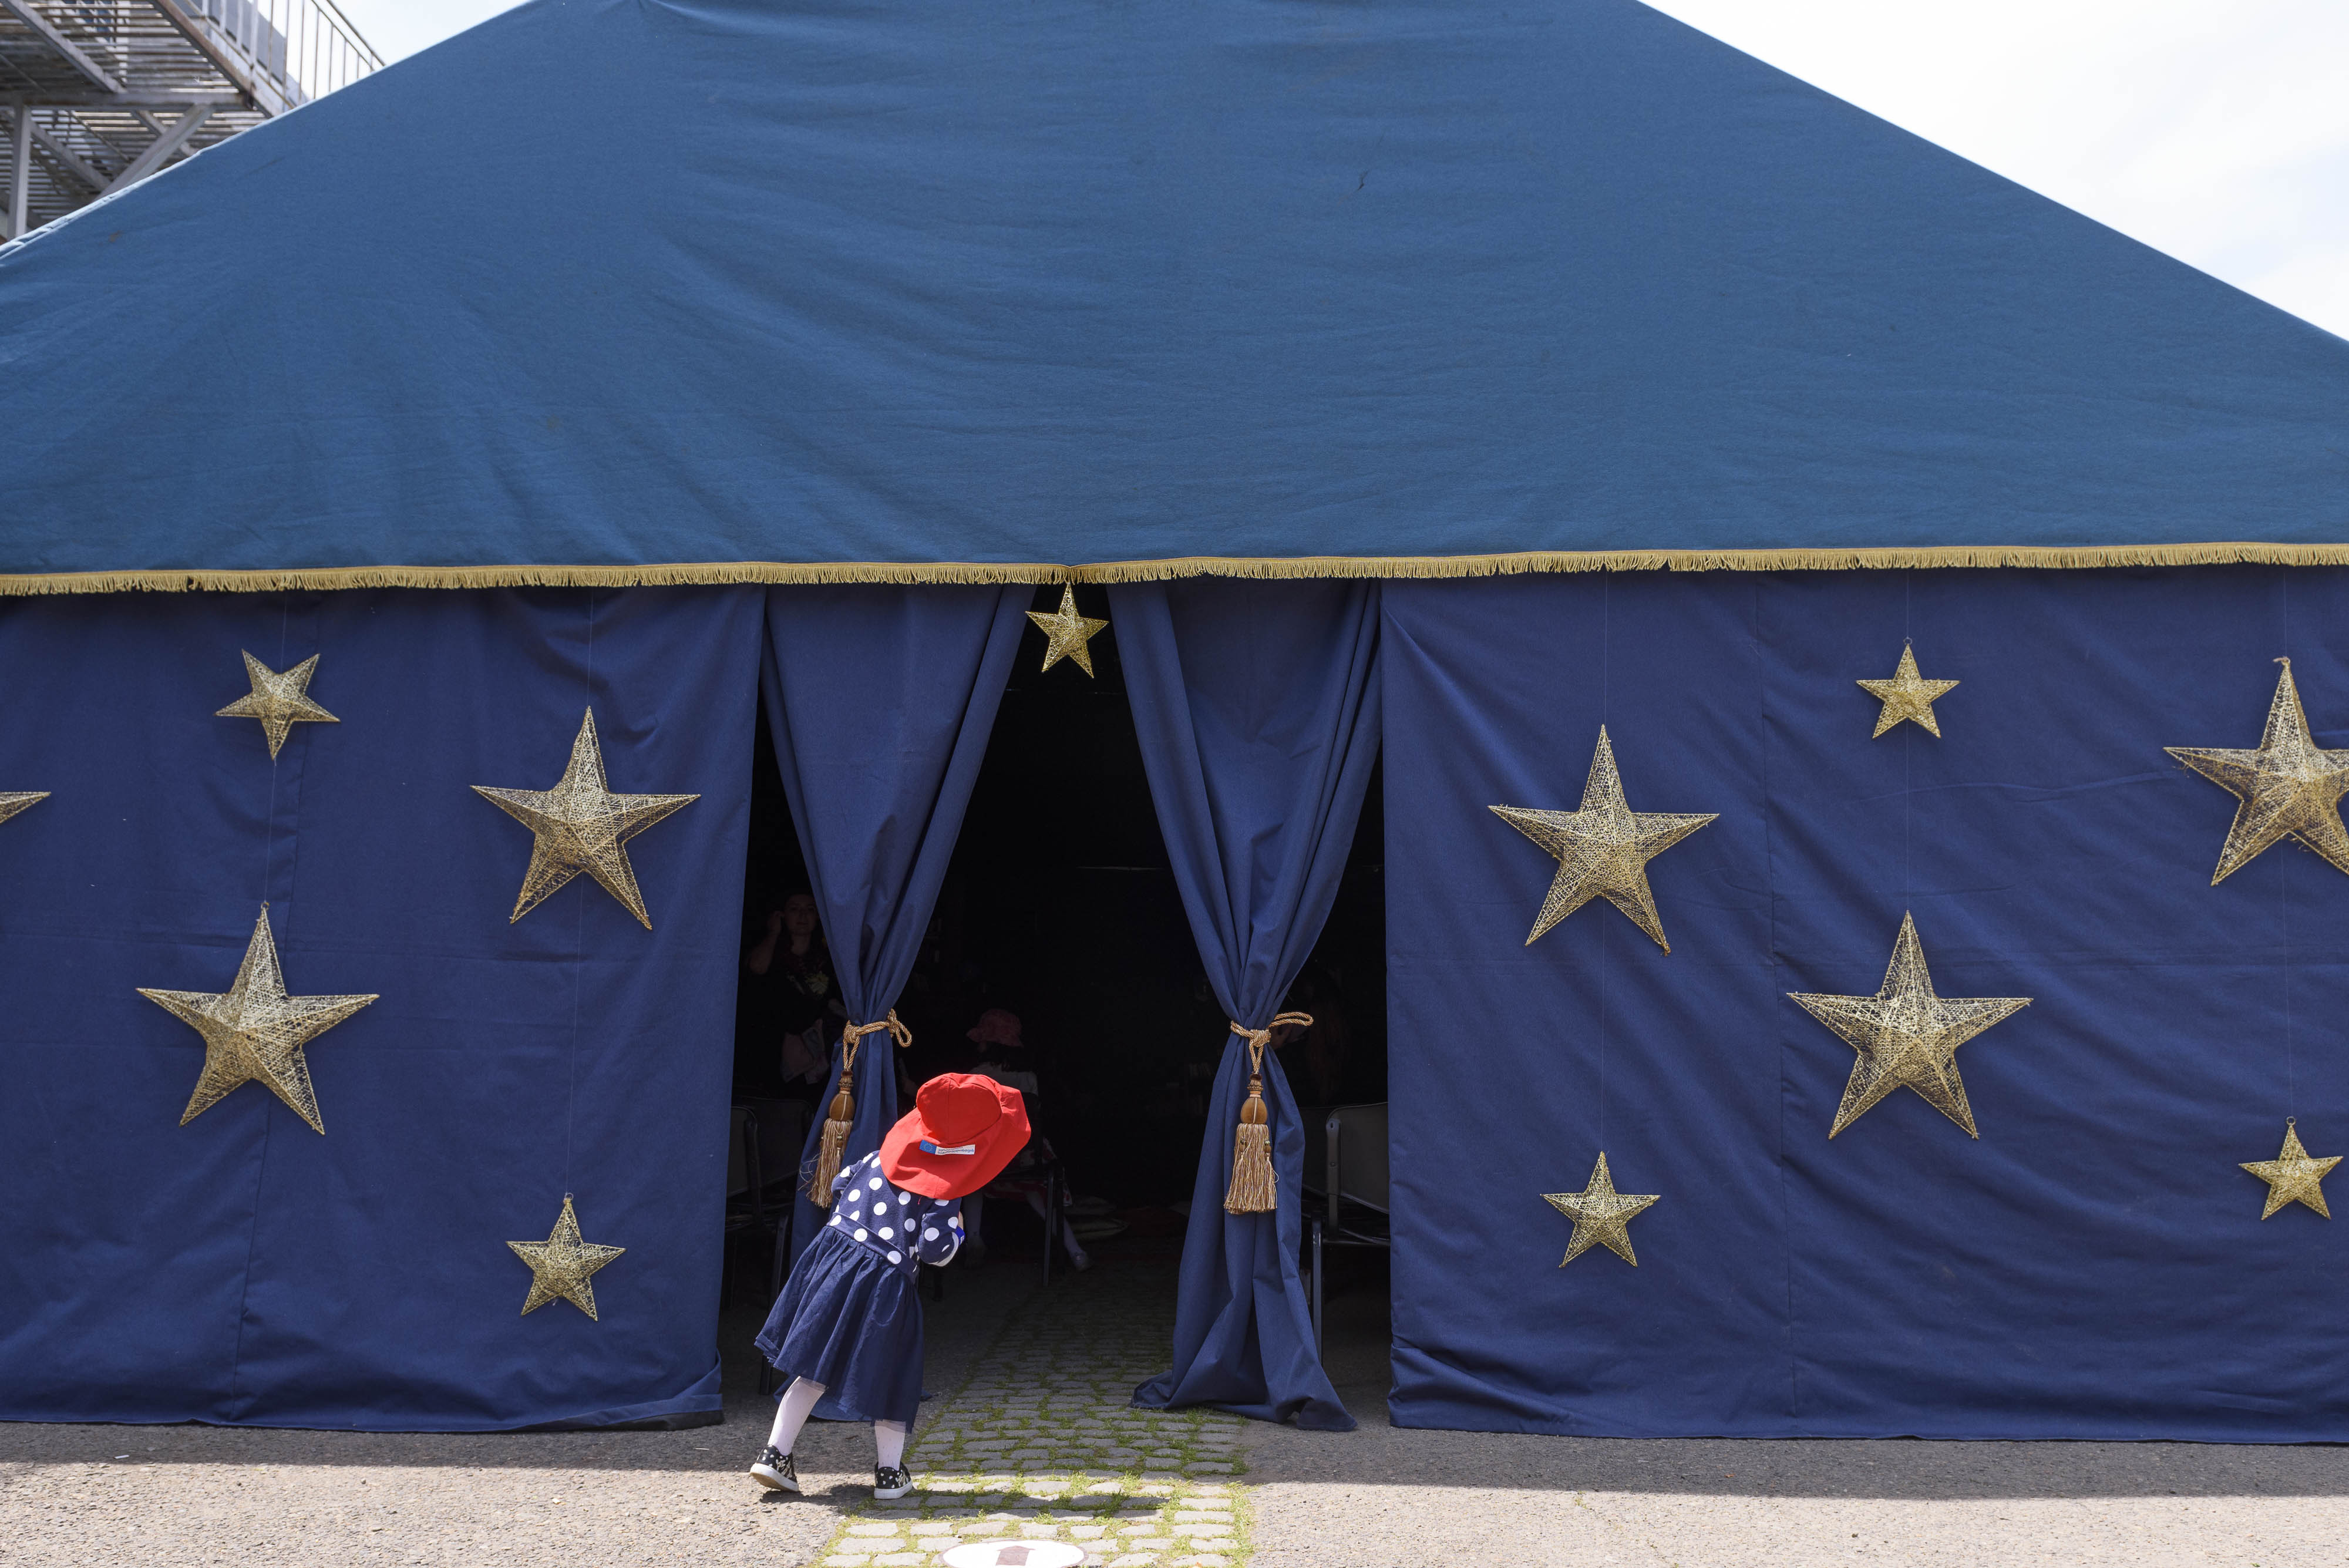 A red-hat baby looking inside a blue magic tent with yellow stars